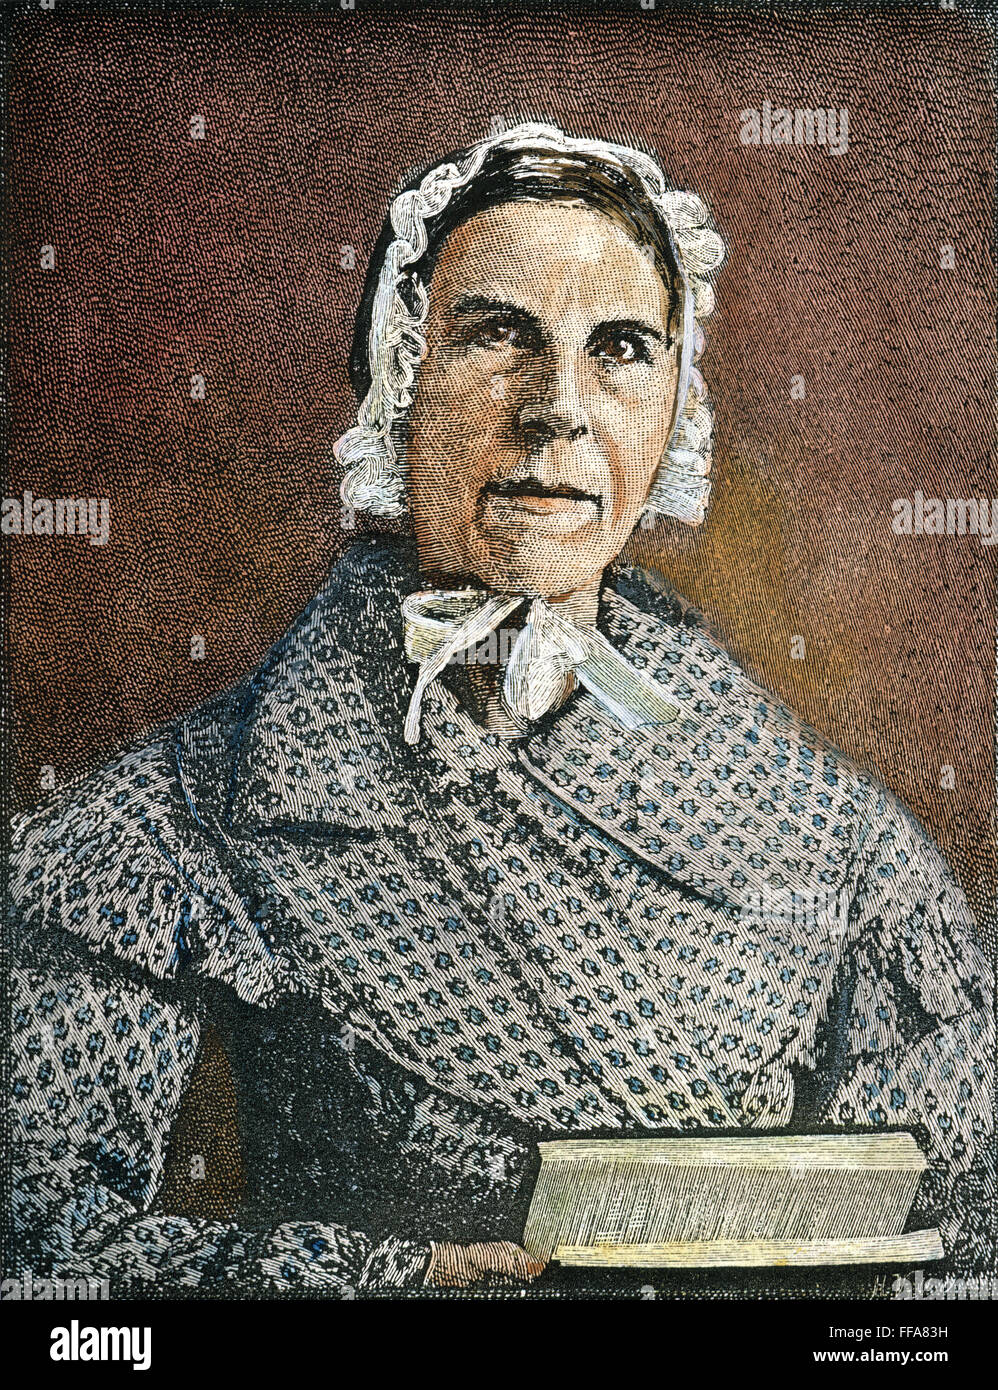 SARAH MOORE GRIMKE /n(1792-1873). American reformer and abolitionist. Engraving, 19th century. Stock Photo